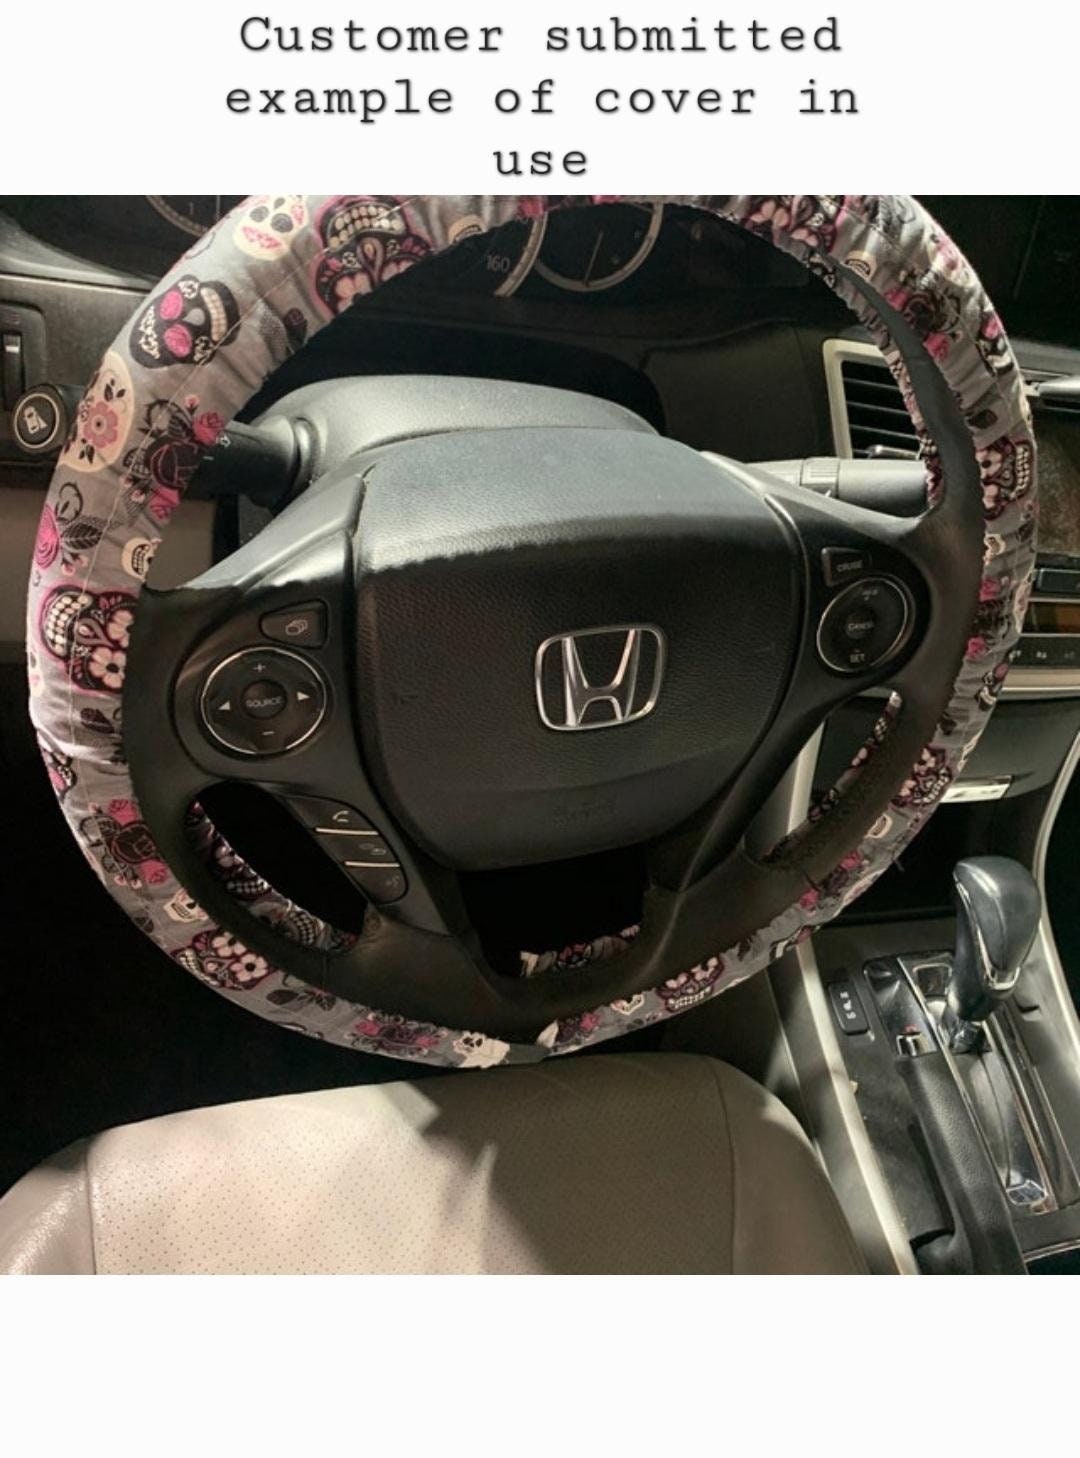 Vibrant Floral Steering Wheel Cover, 100% Cotton, Washable, Custom Car Accessories - Harlow's Store and Garden Gifts